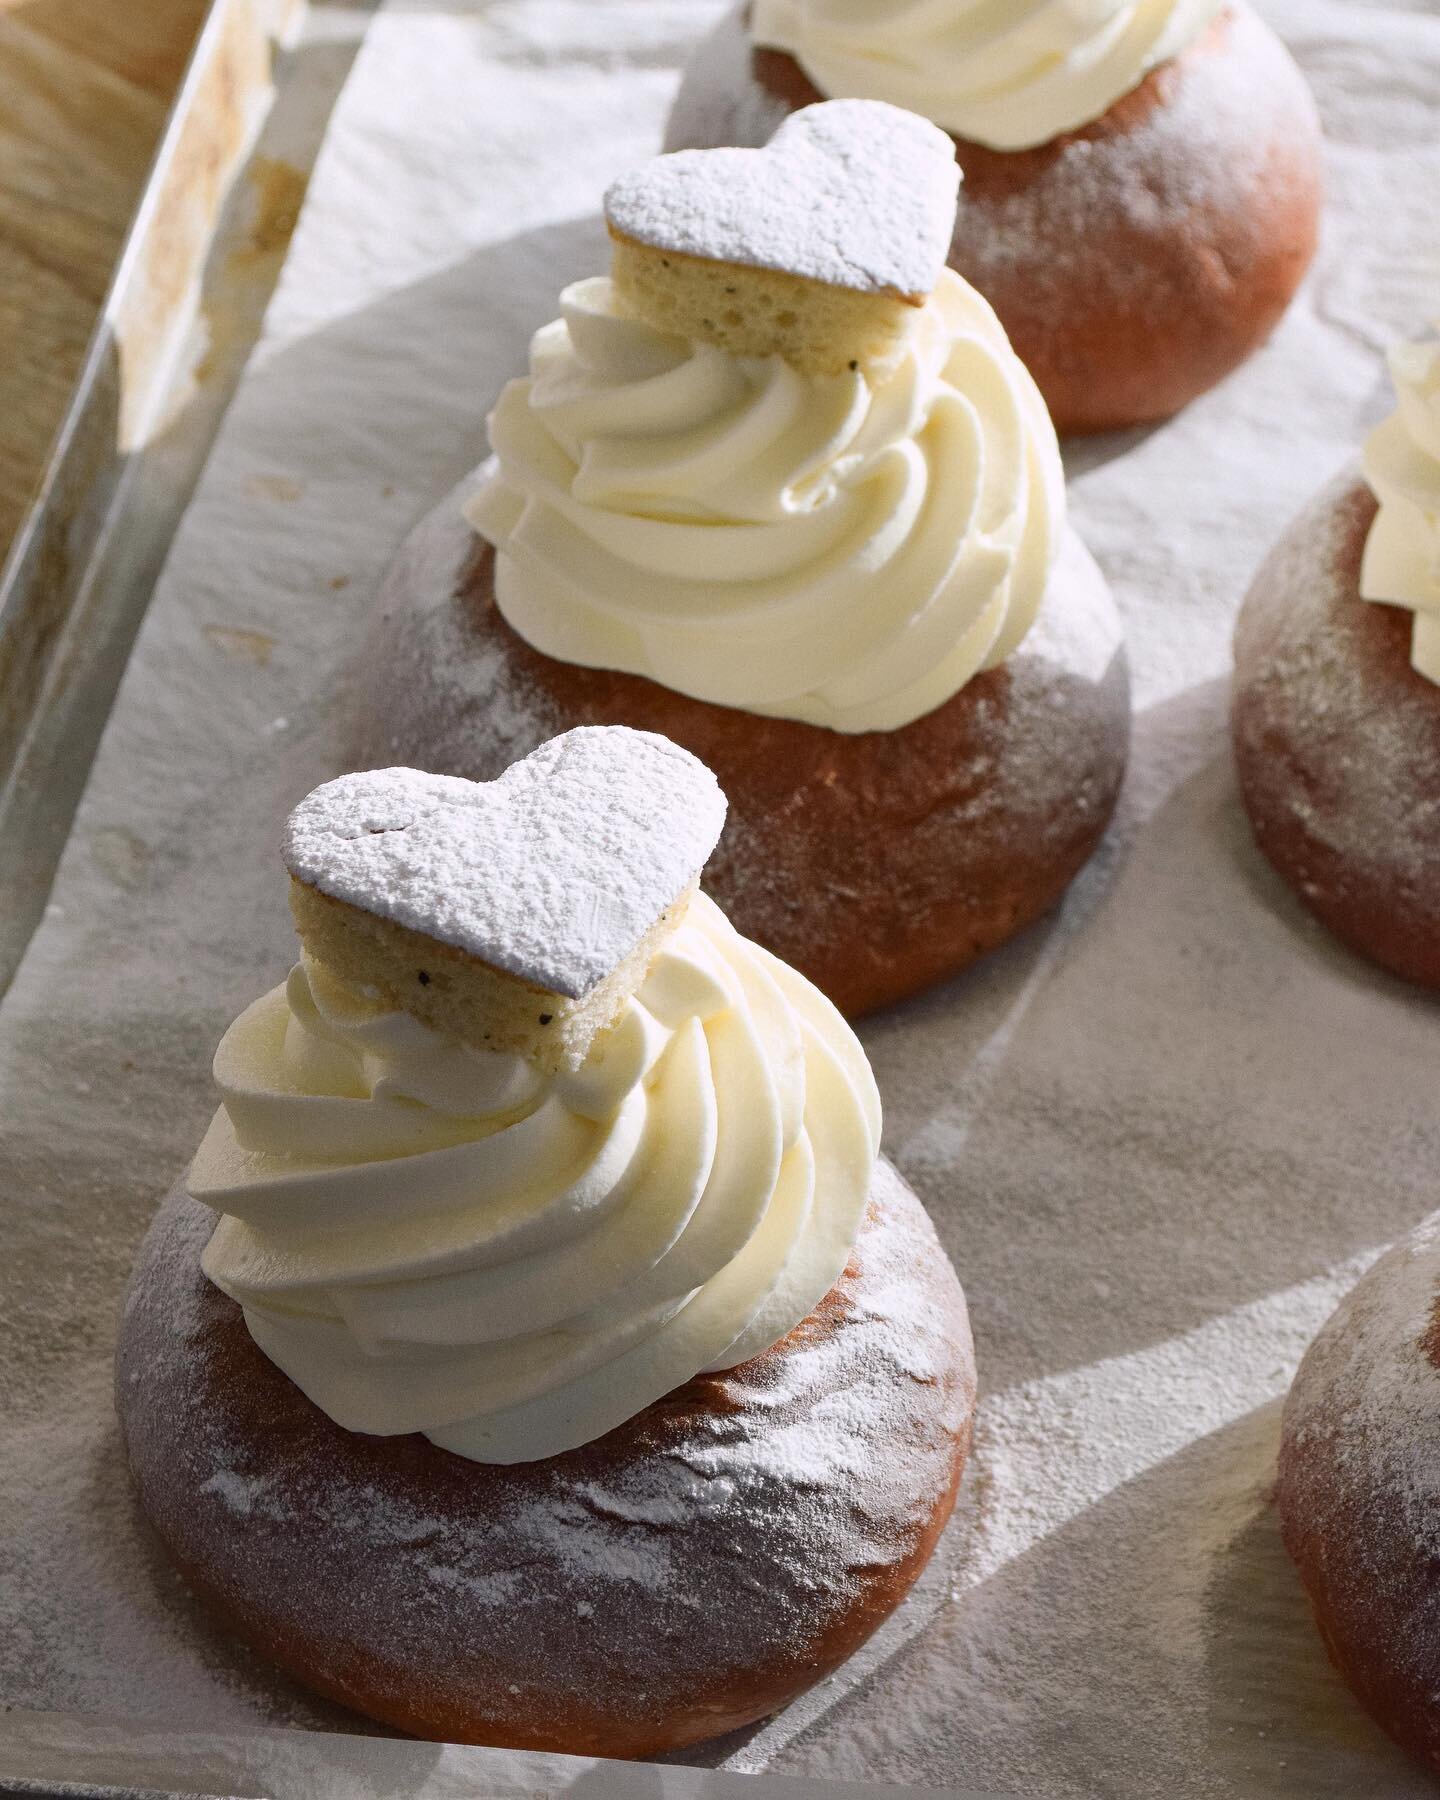 Glad alla hj&auml;rtans dag 💕💖 Happy Valentines Day!!

Will you be sharing a Valentines Semla* bun with a special someone? 👀🫶🏼

#bakery #baking #fika #scandanavian #swedish #traditional #traditionalswedish #swedishbaking #traditionalbaking #inst